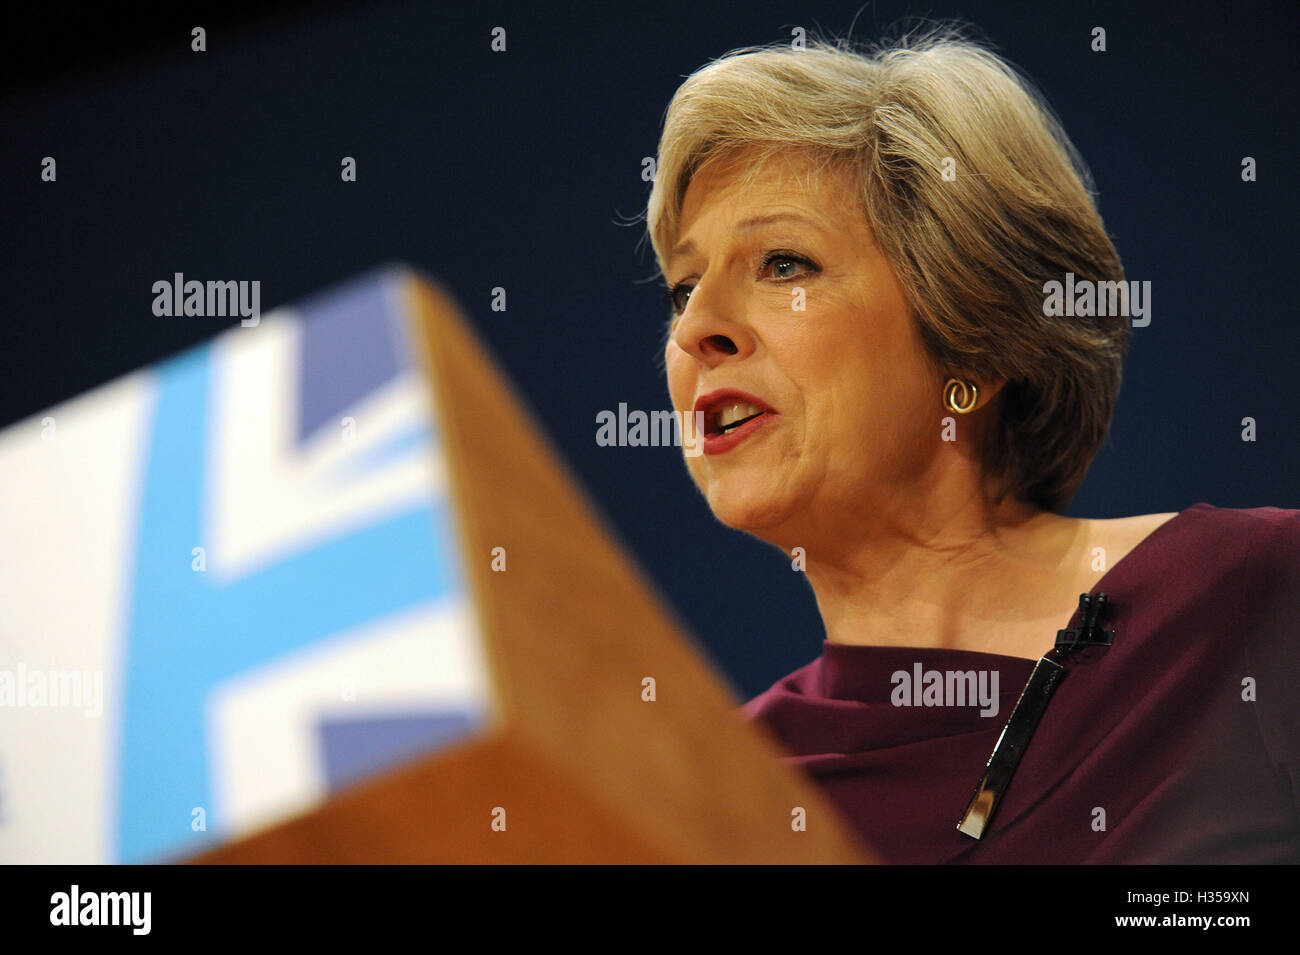 Birmingham, UK. 5th Oct, 2016. Theresa May, Prime Minister and Leader of the Conservative Party delivers her speech to conference, on the fourth and final day of the Conservative Party Conference at the ICC Birmingham. The theme of the speech was 'A Country that Works for Everyone'. This conference follows the referendum decision for the UK to leave the European Union, and the subsequent election of Theresa May as leader of the Conservative Party. Credit:  Kevin Hayes/Alamy Live News Stock Photo